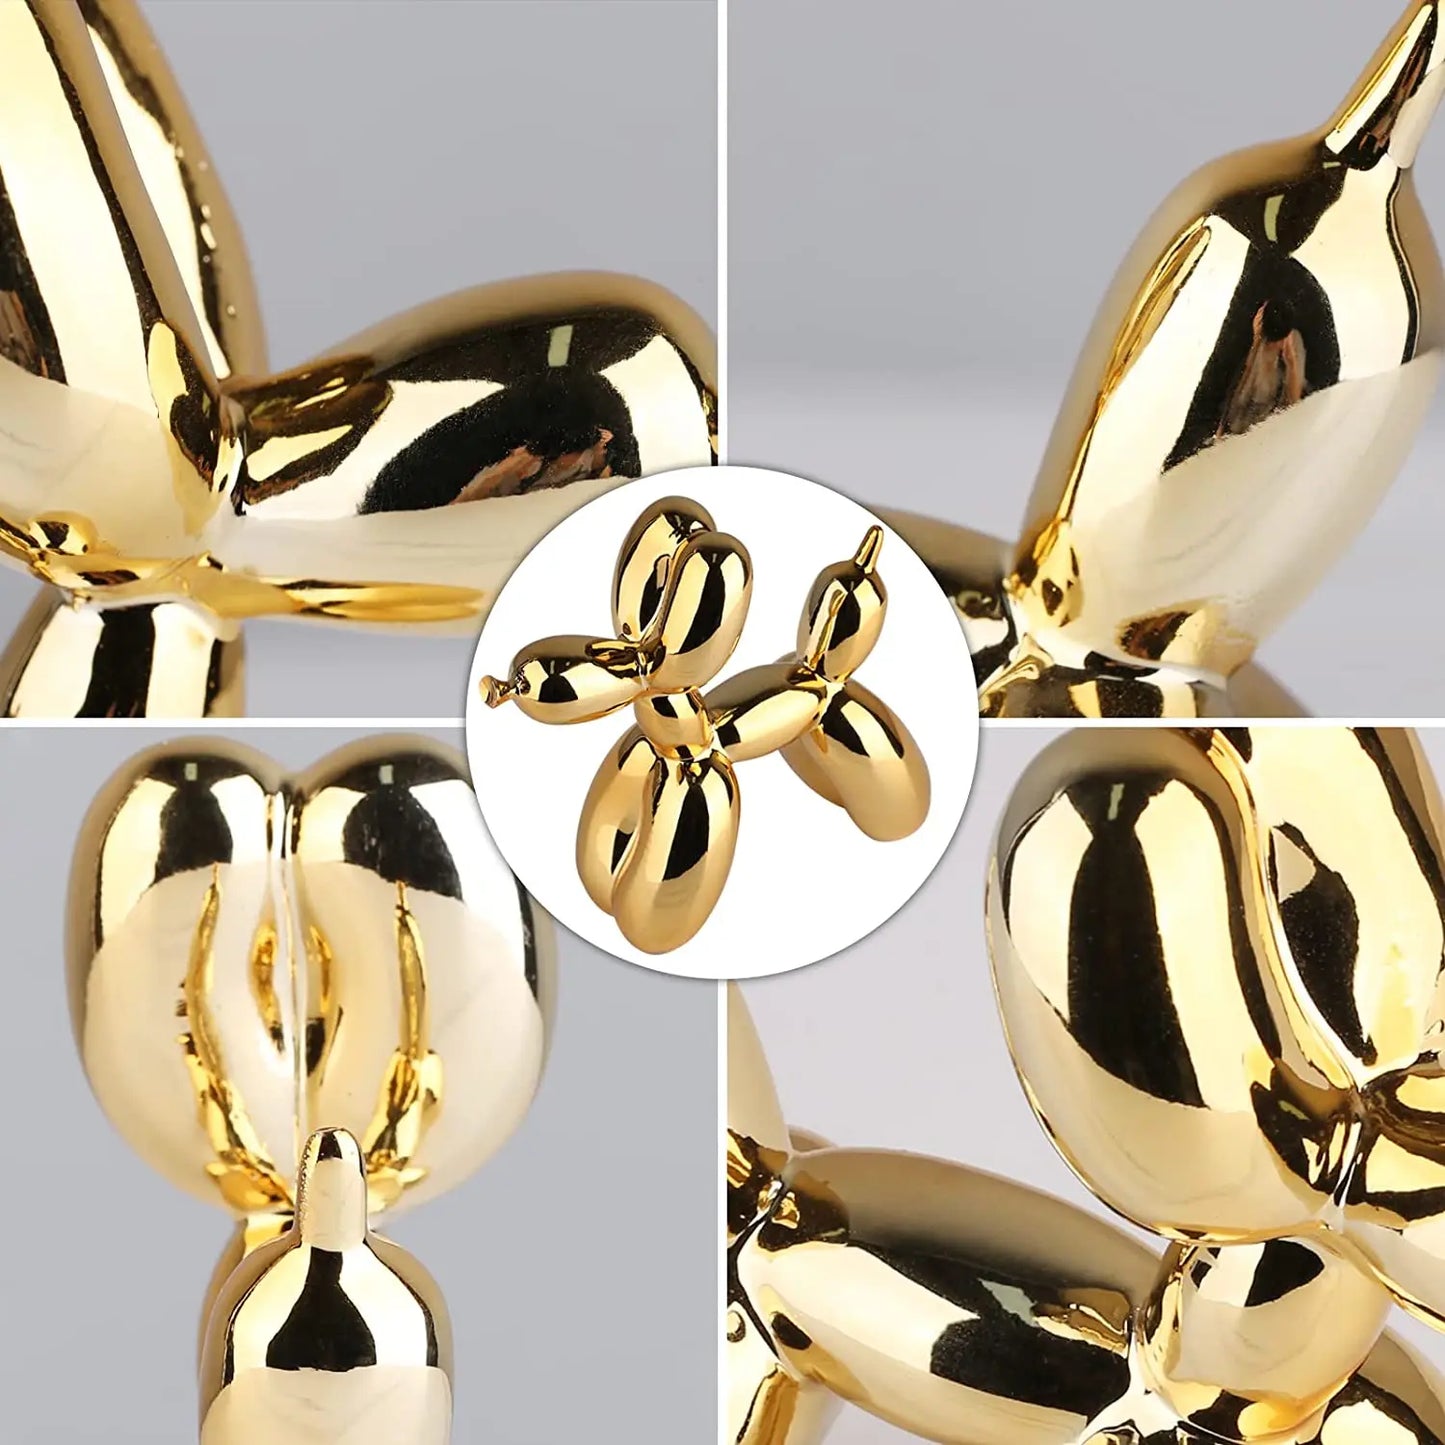 Balloon Dog [Small] X KLUSIVE STORE